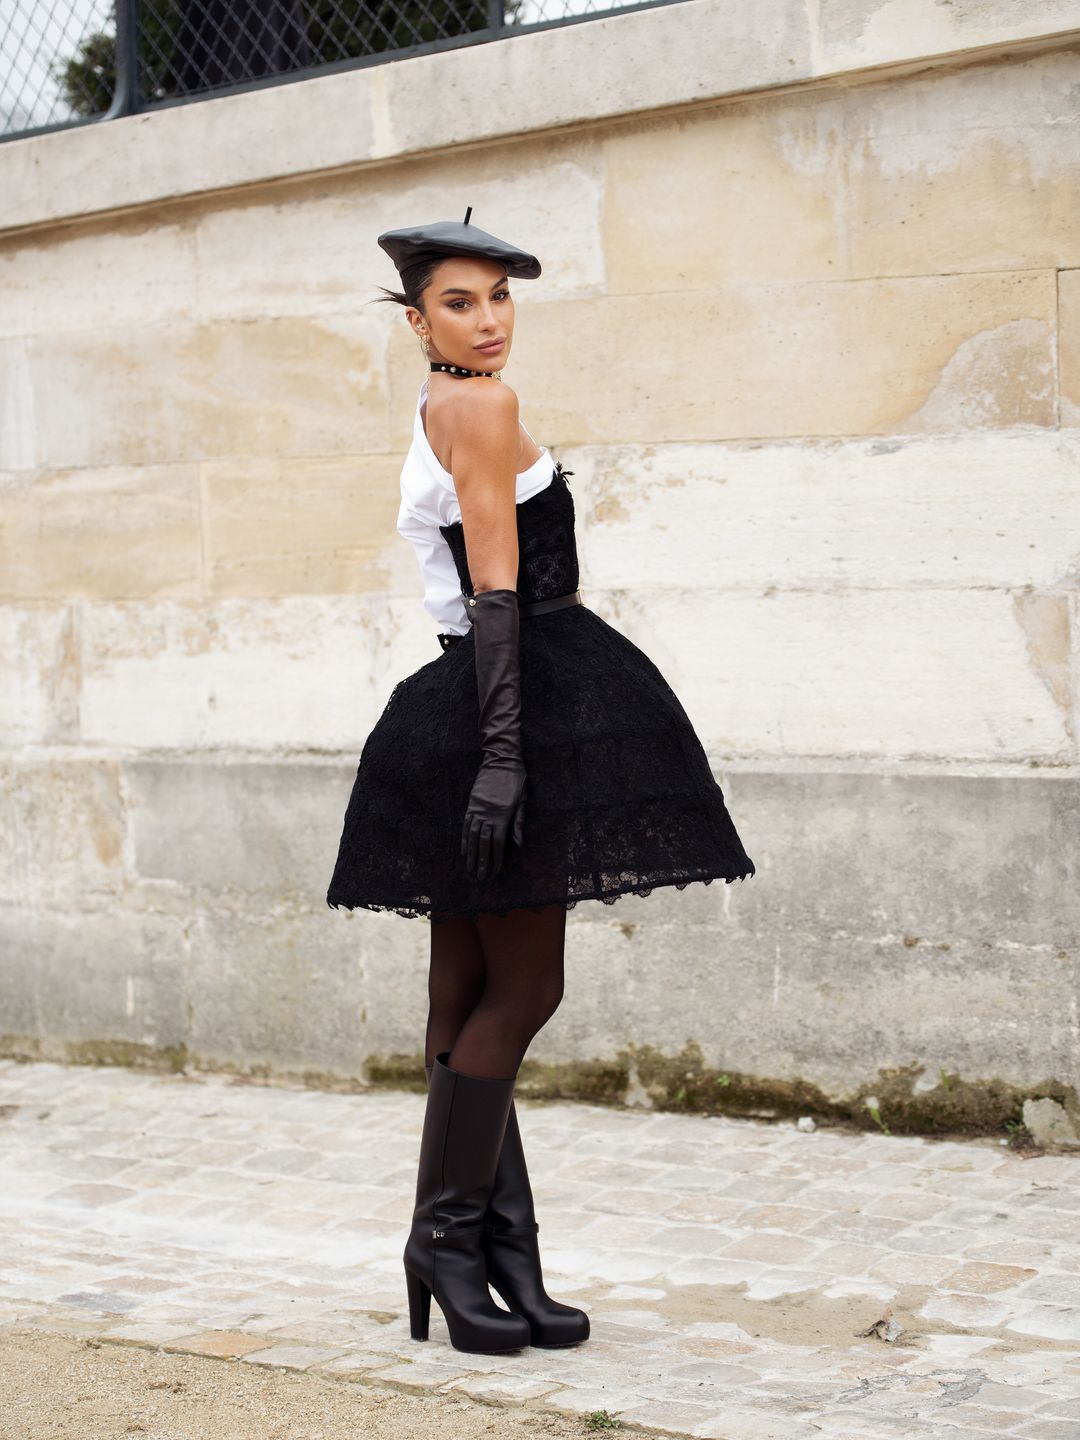 Jessica Aidi wears white one sleeve shirt, black strapless dress in lace, black beret, black leather gloves and black high heel boots outside Dior 